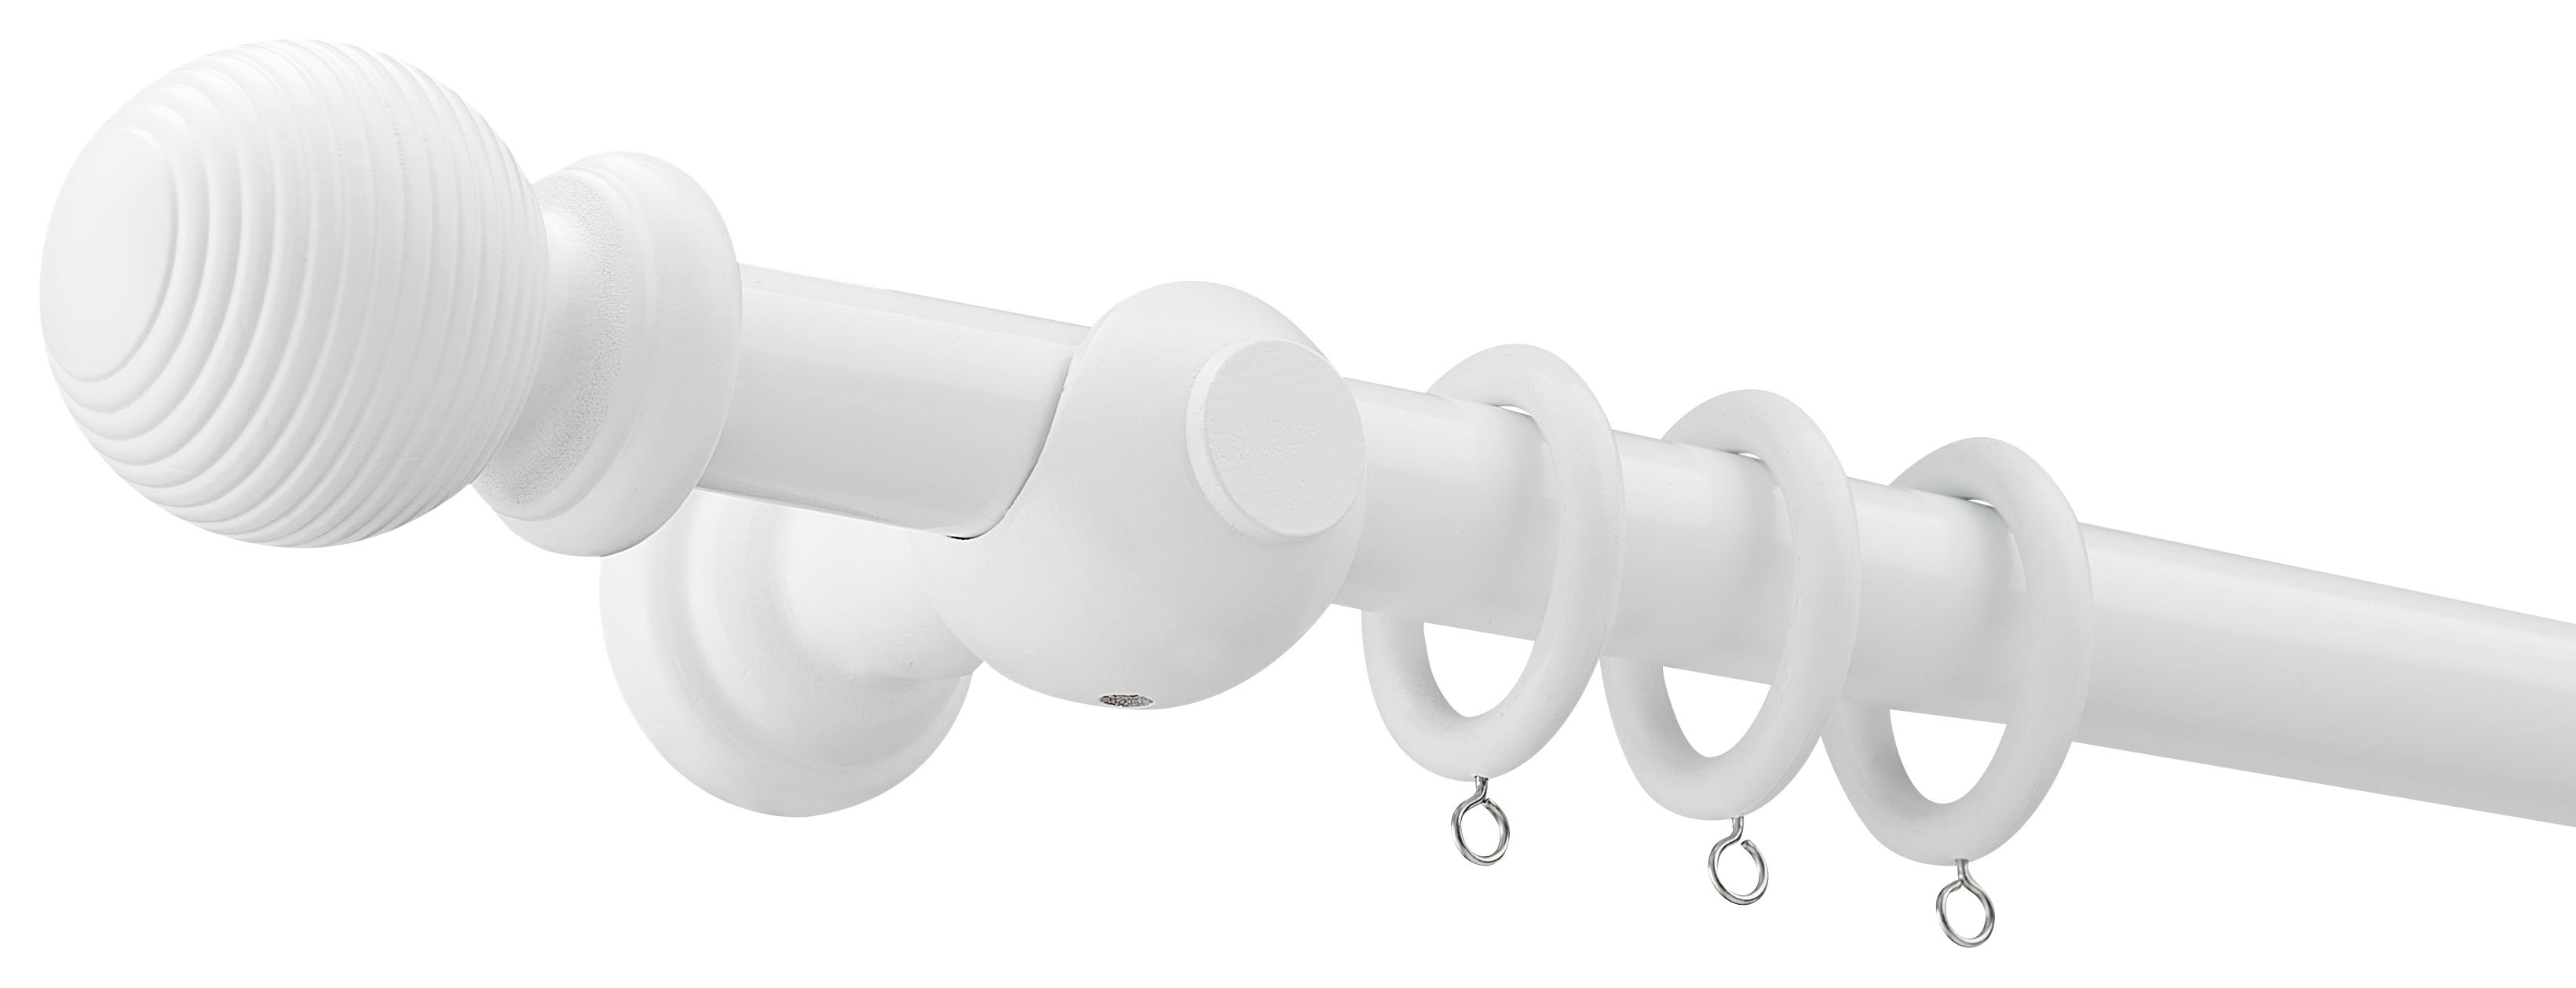 Image of Wickes 28mm Wooden Curtain Pole White (1.5m)